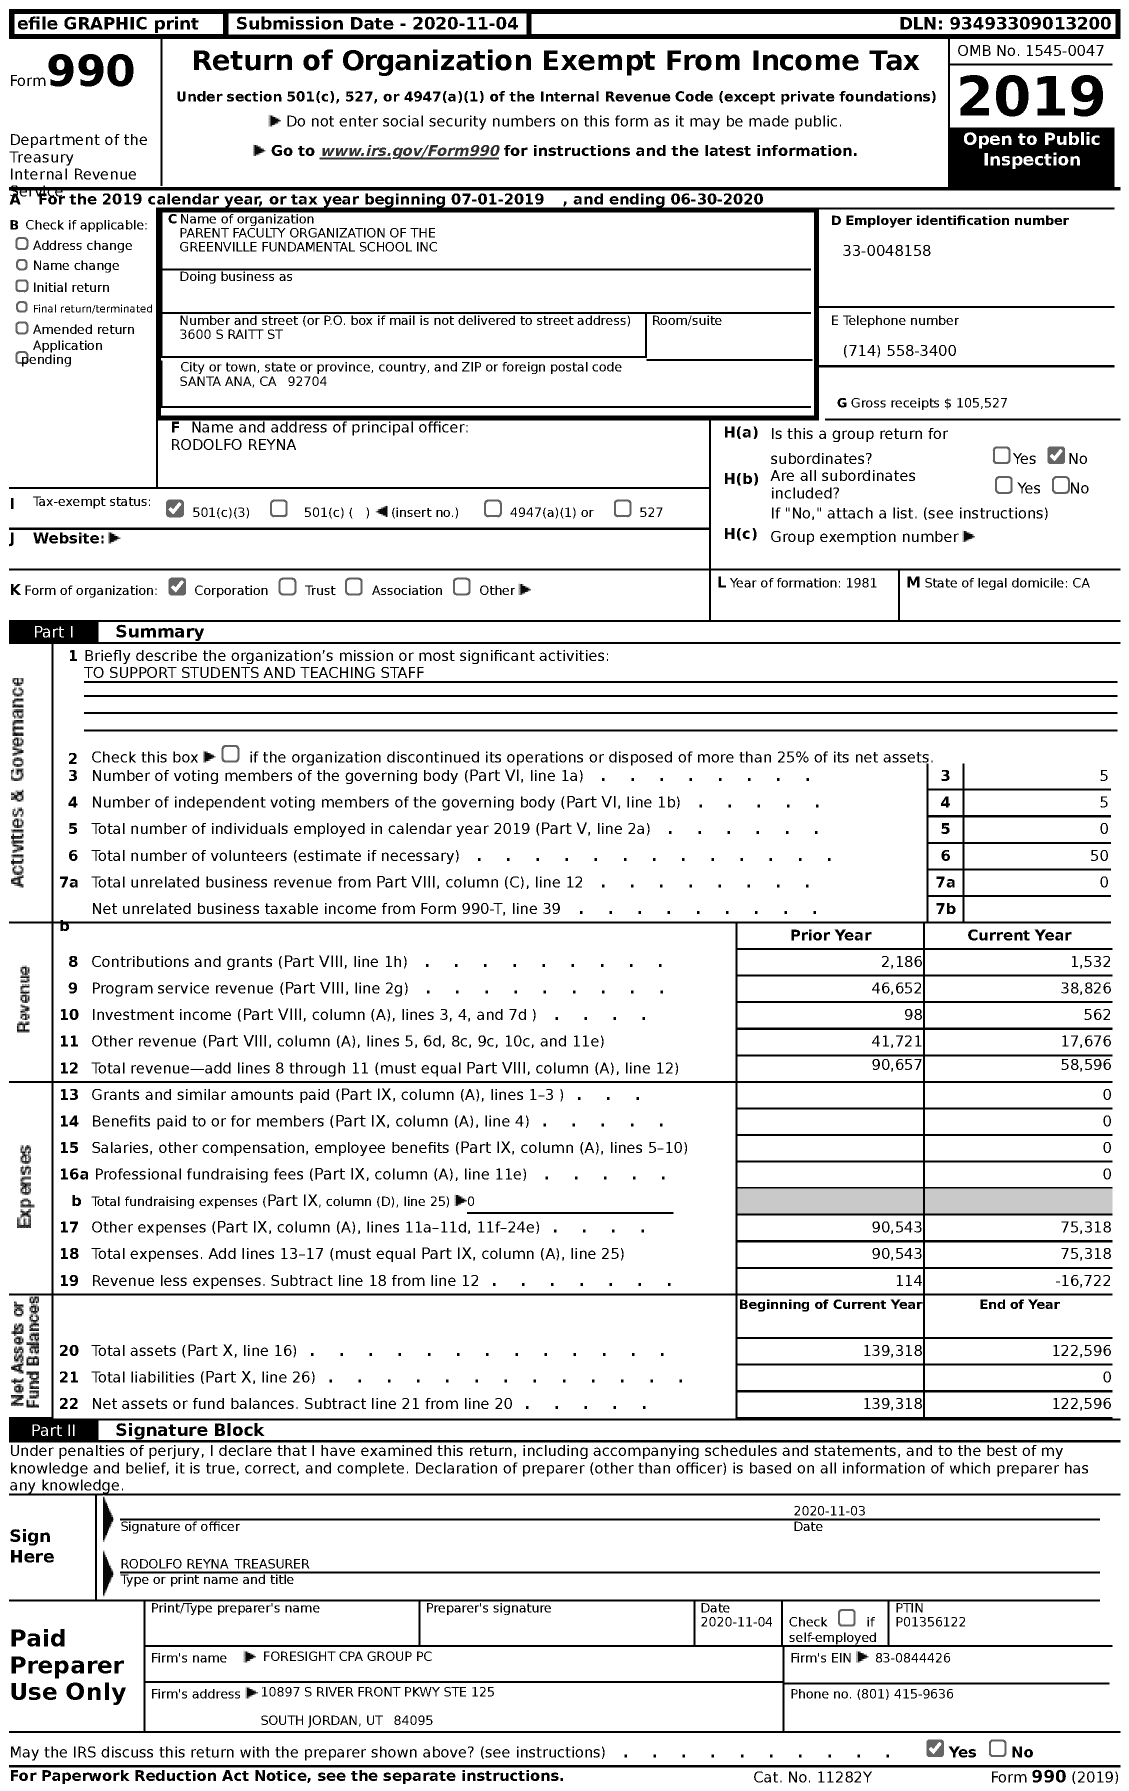 Image of first page of 2019 Form 990 for Parent Faculty Organization of Greenville Fundamental School